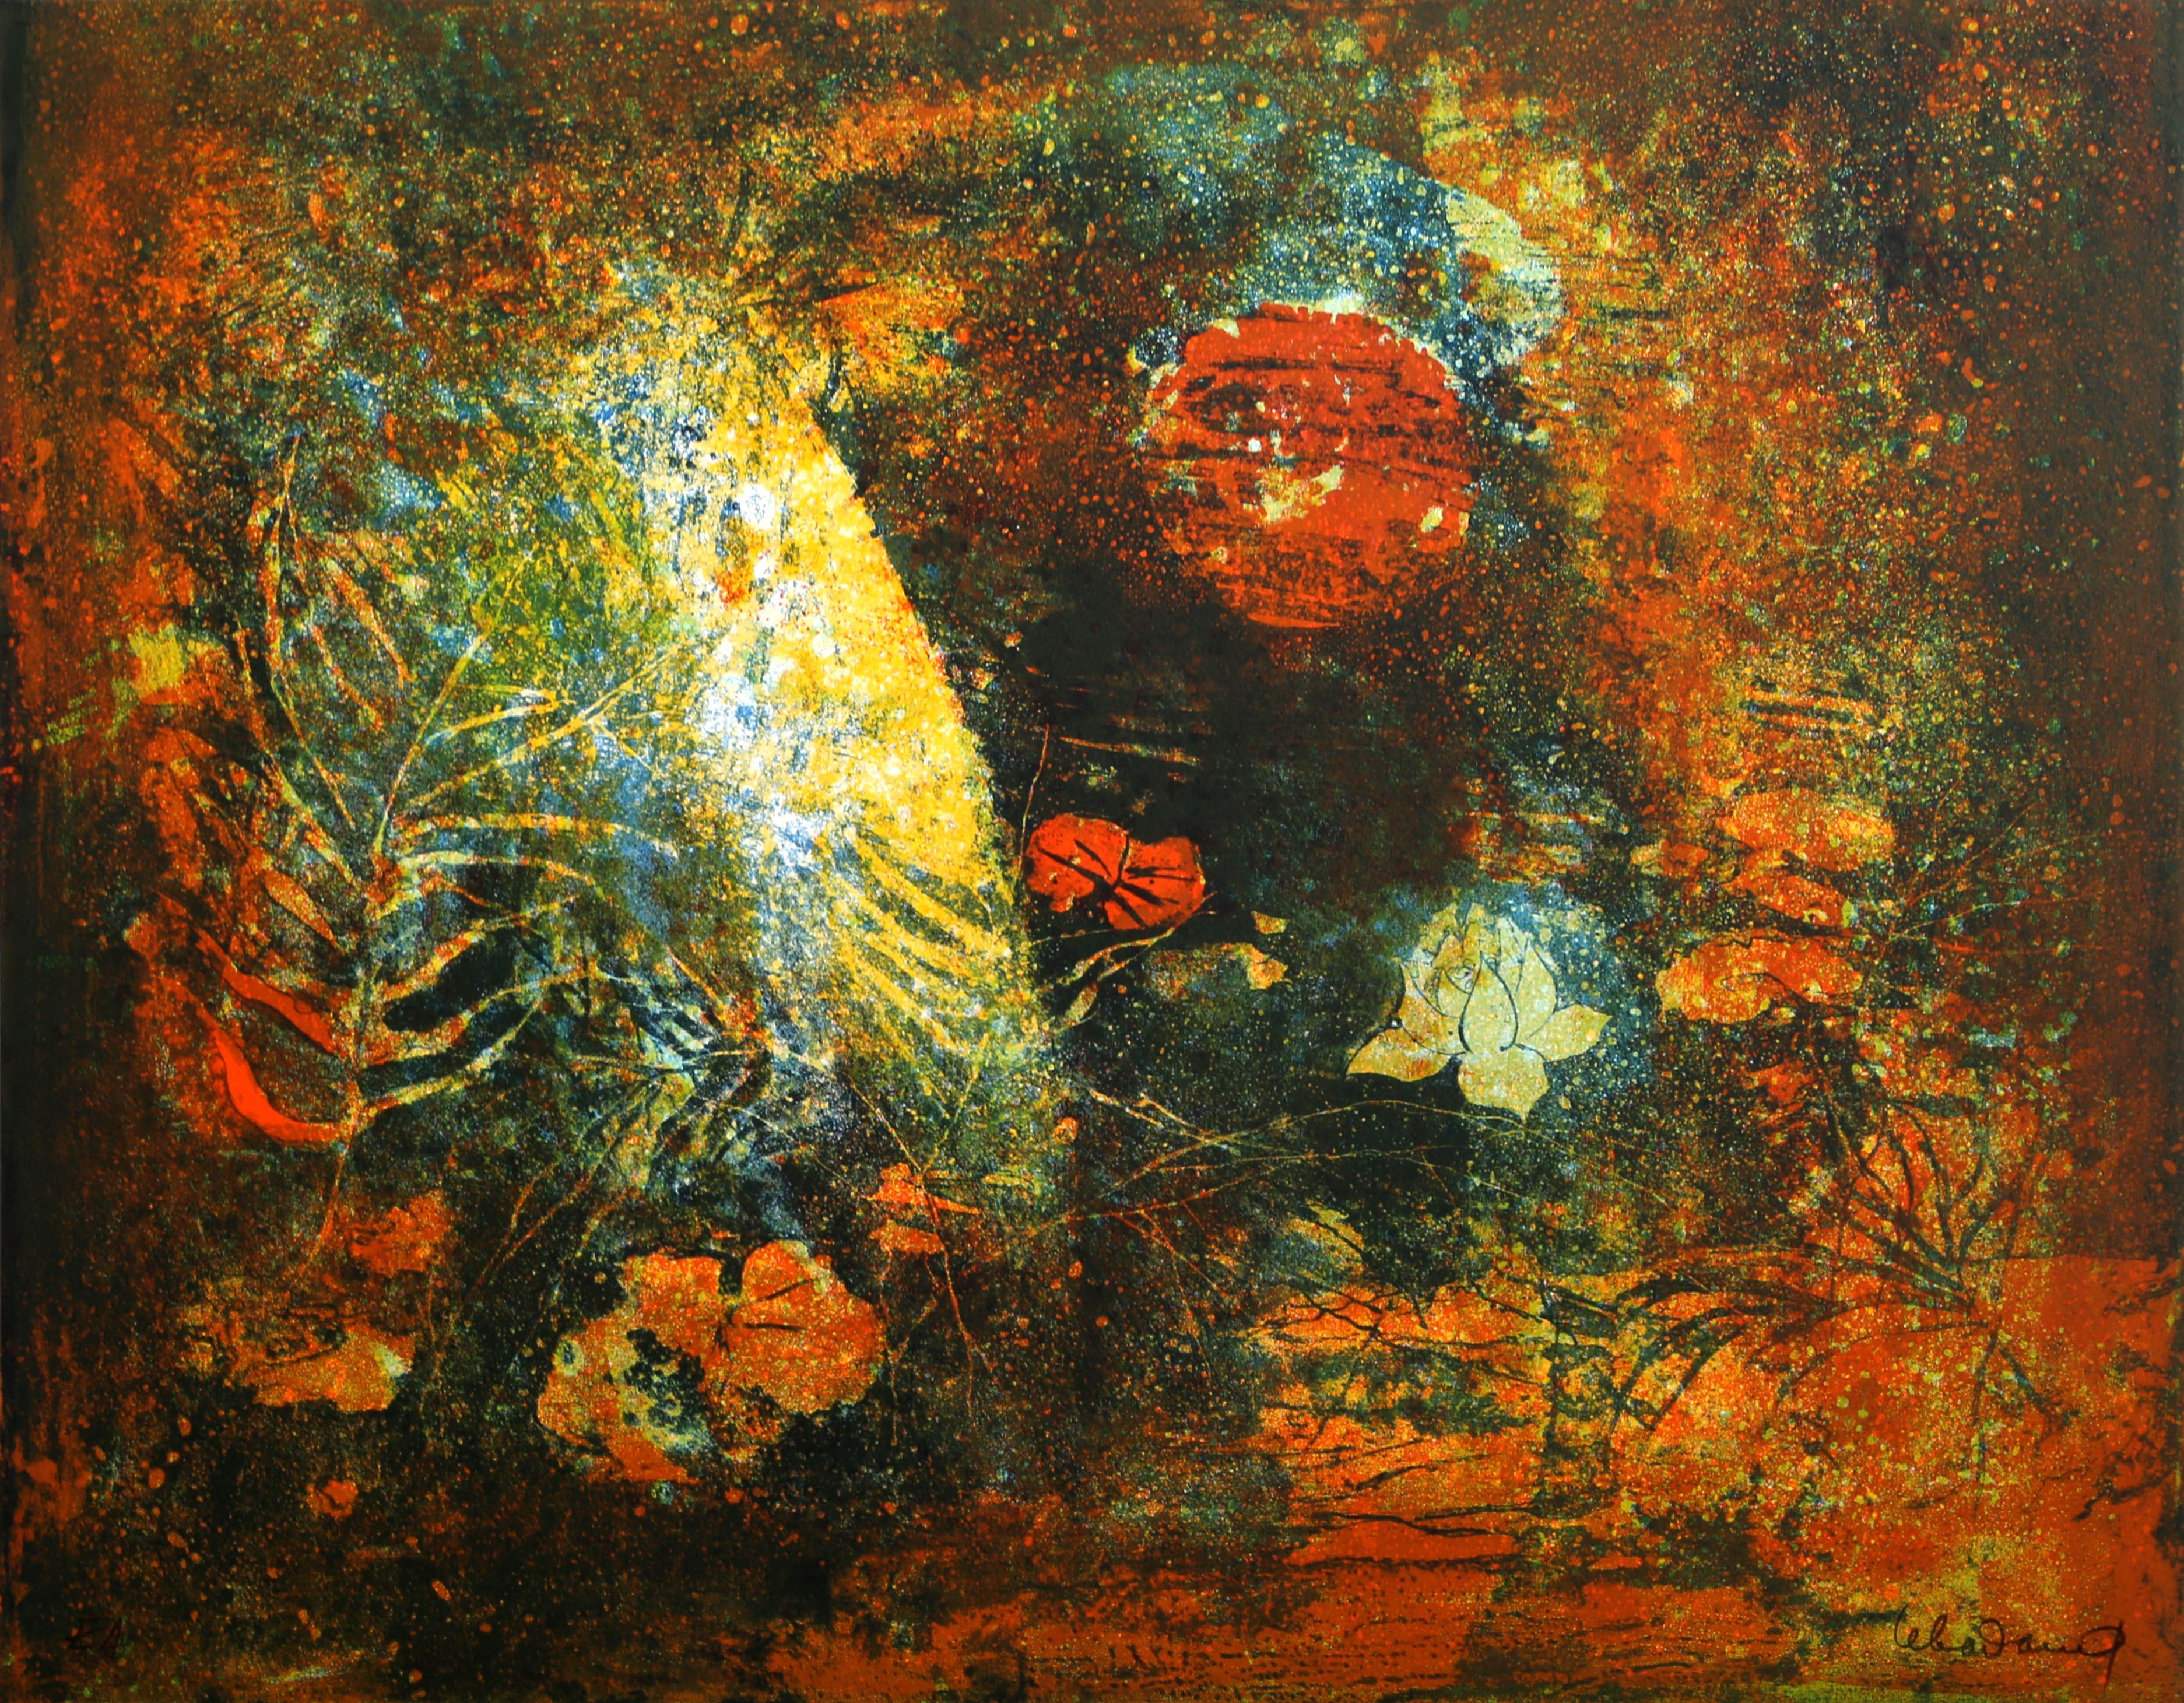 Hoi Lebadang Still-Life Print - Flowers in the Moonlight, Lithograph by Lebadang